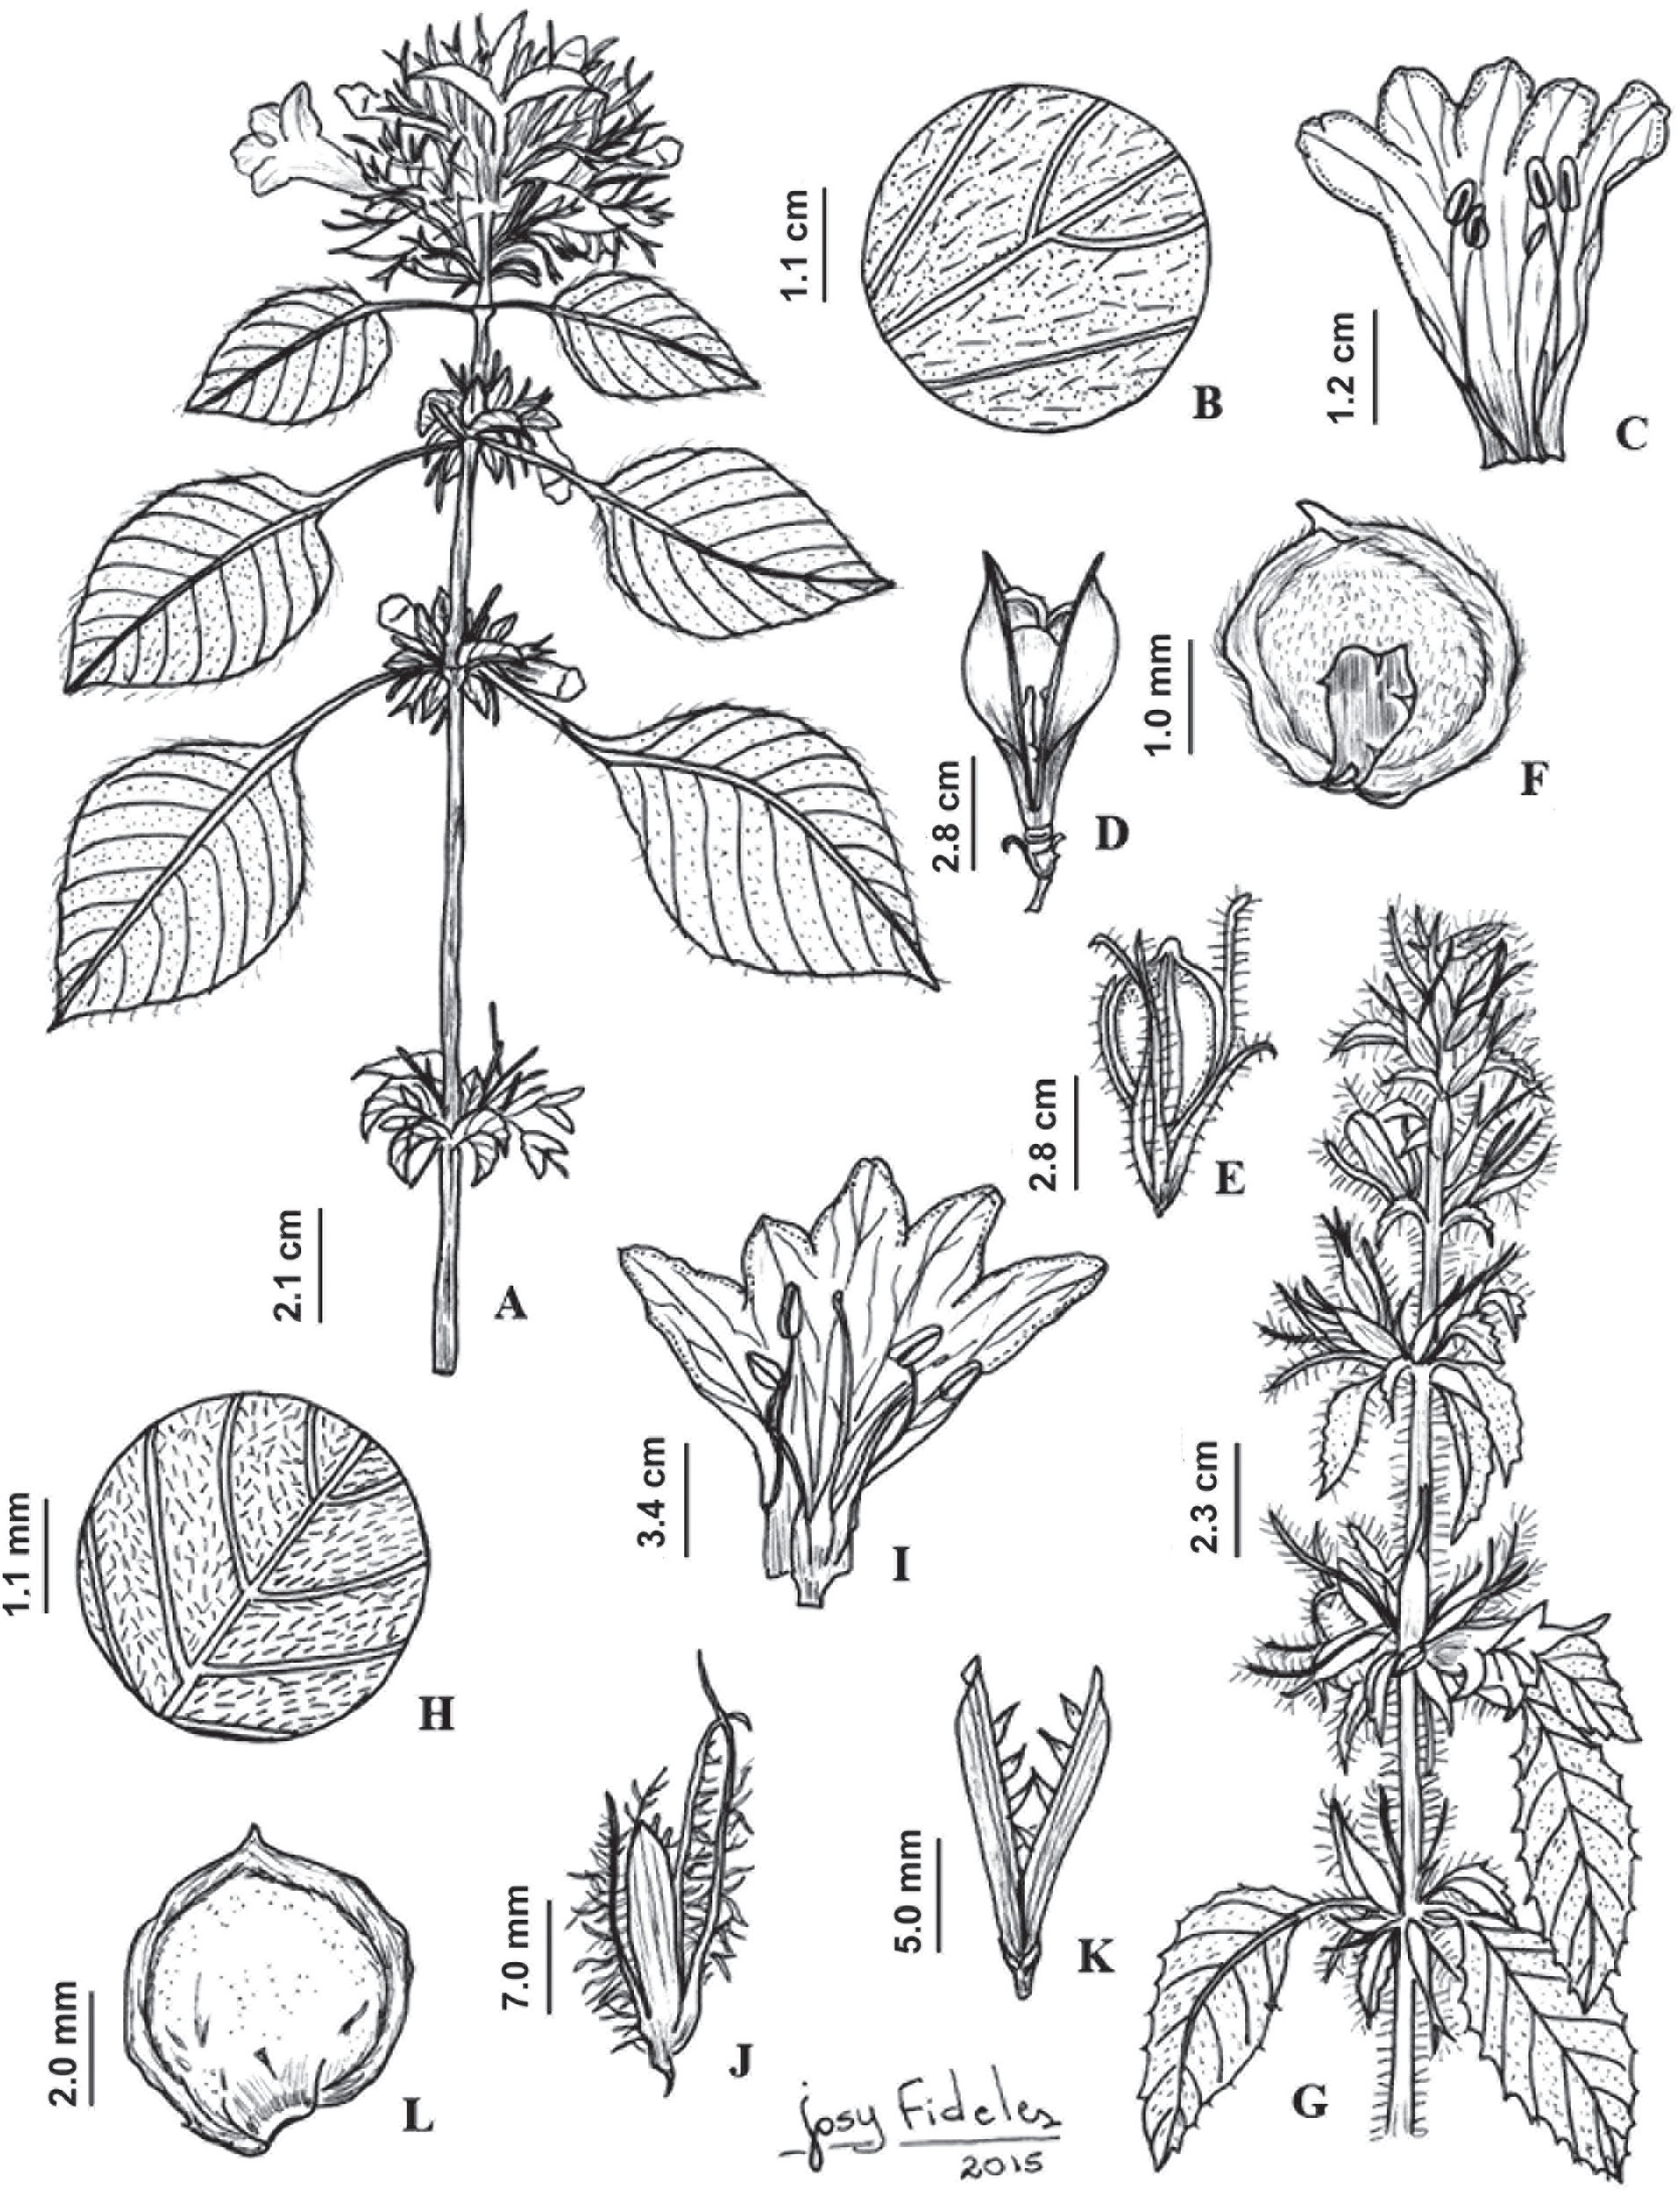 Taxonomic Reconciliation of Smilacaceae in the Indian Subcontinent